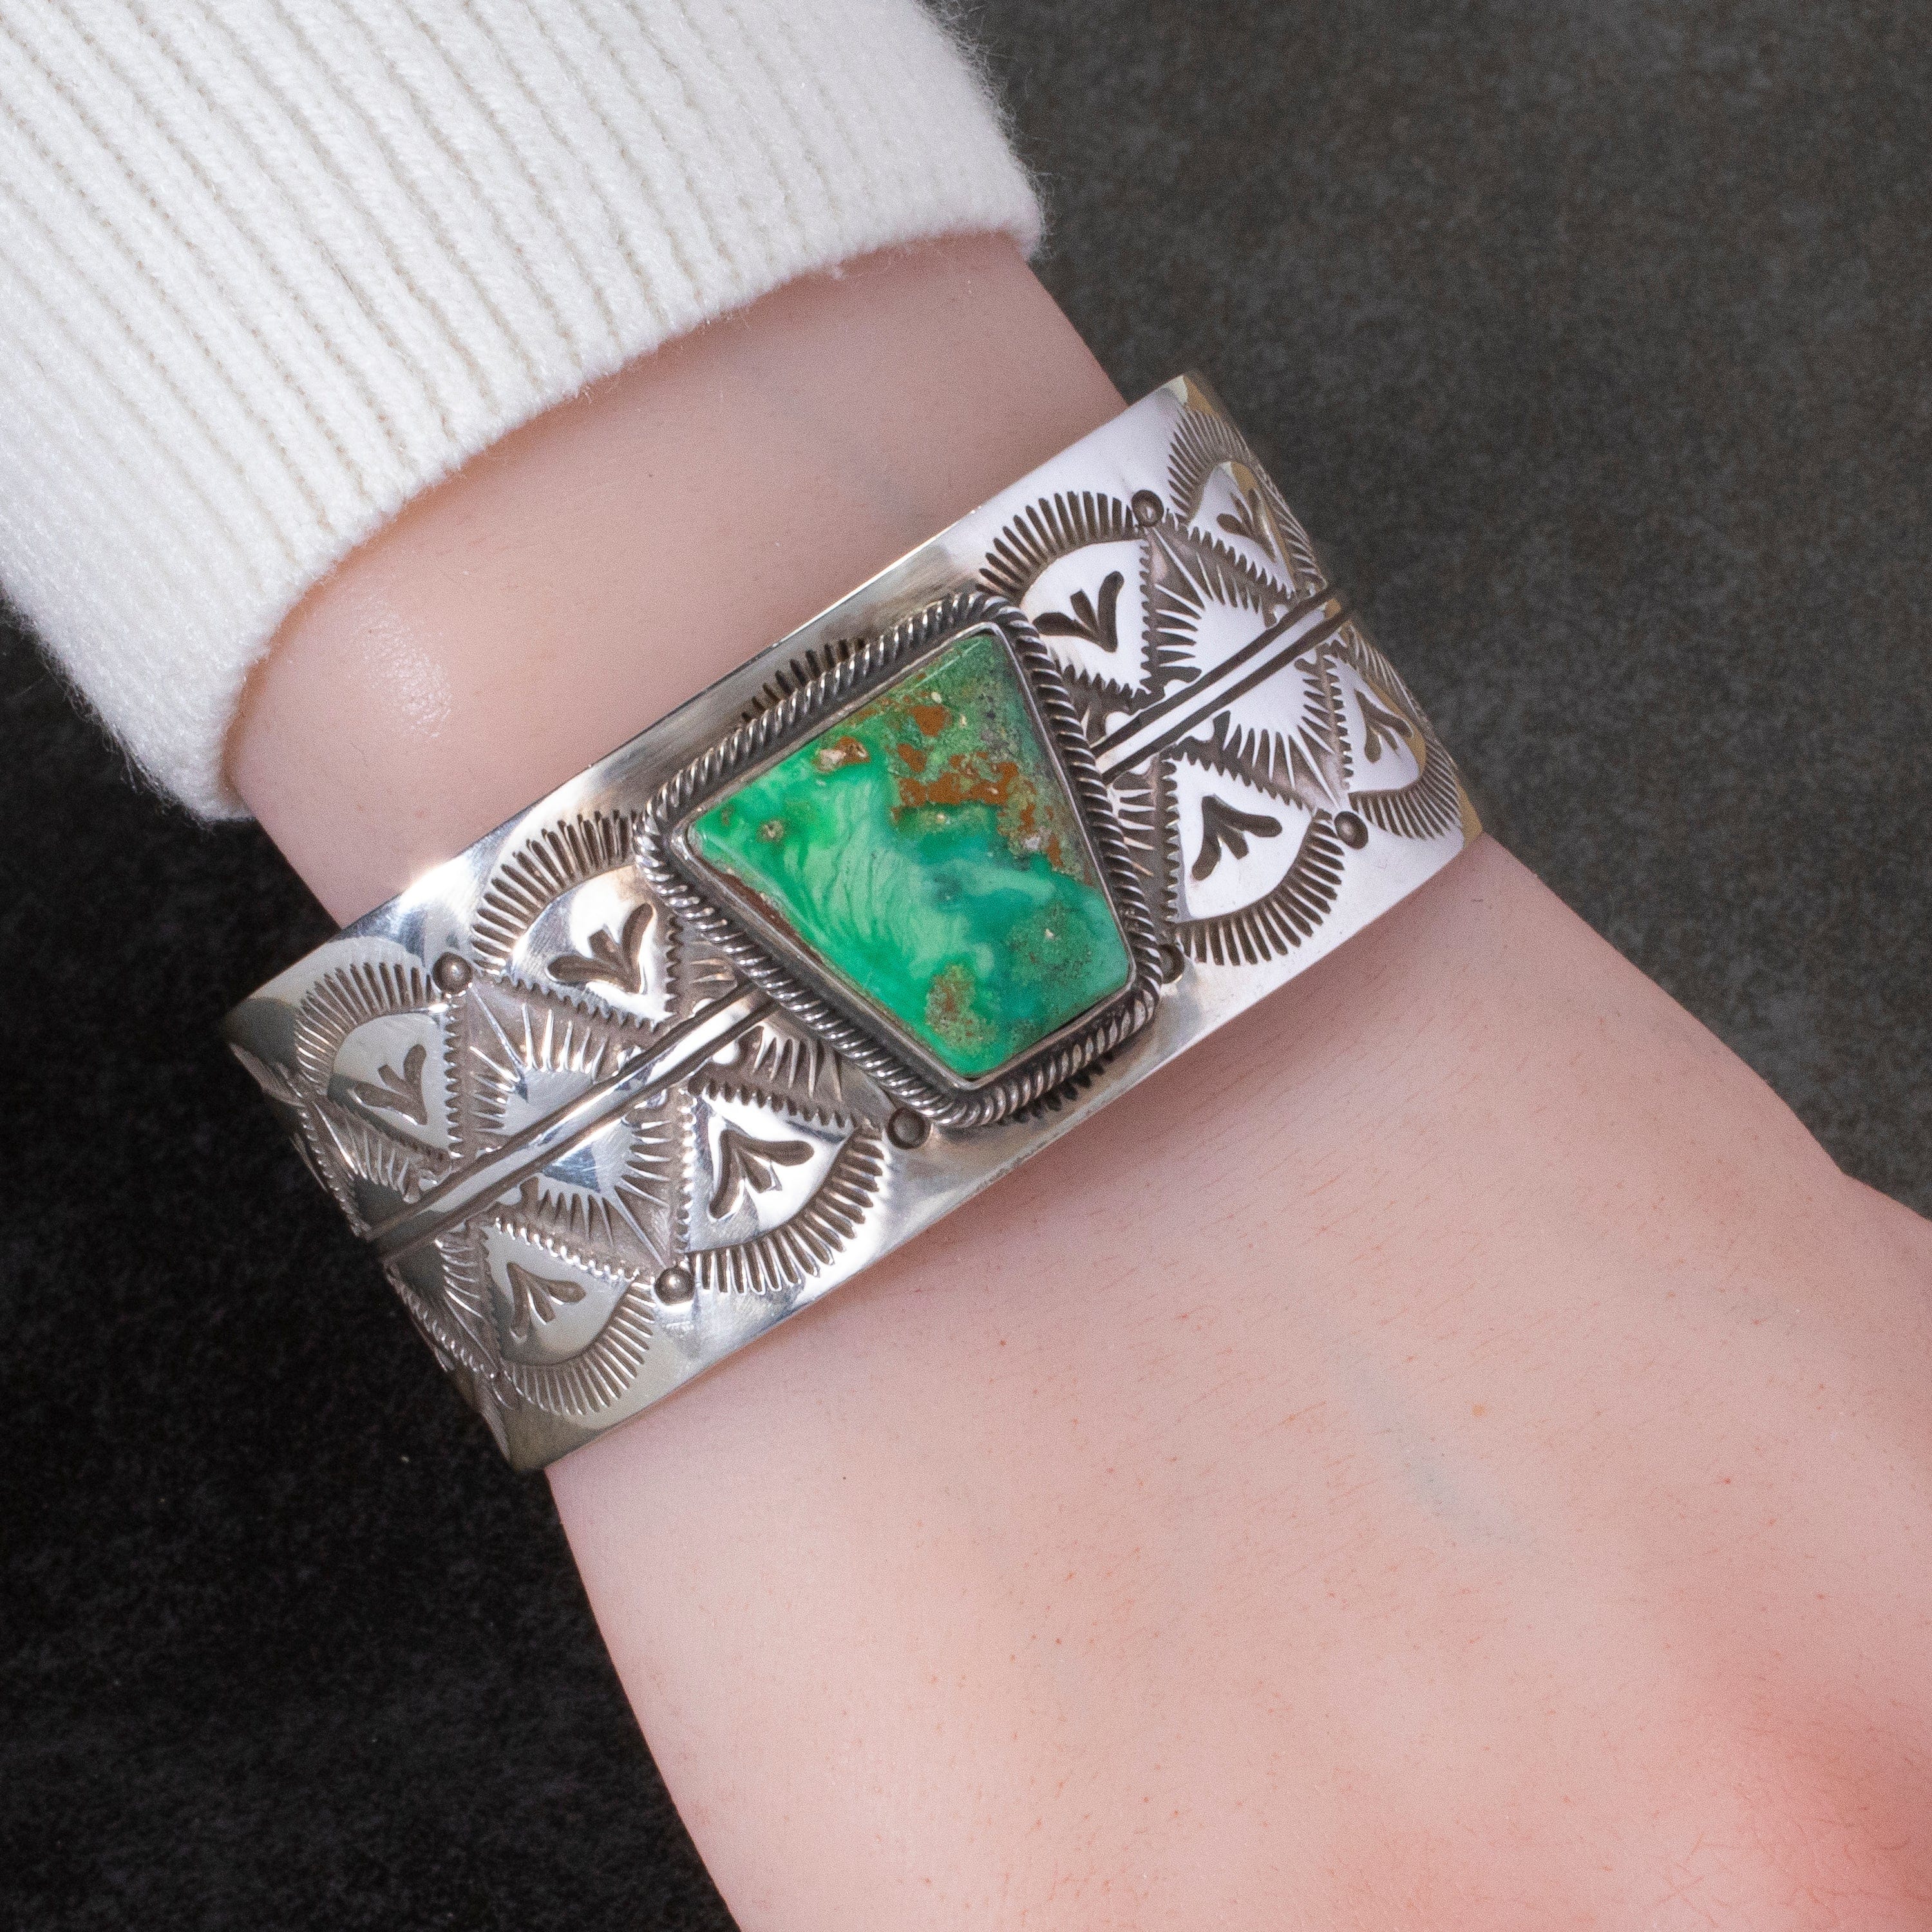 Kalifano Native American Jewelry Larry Martinez Emerald Valley Turquoise USA Native American Made 925 Sterling Silver Cuff NAB2700.012